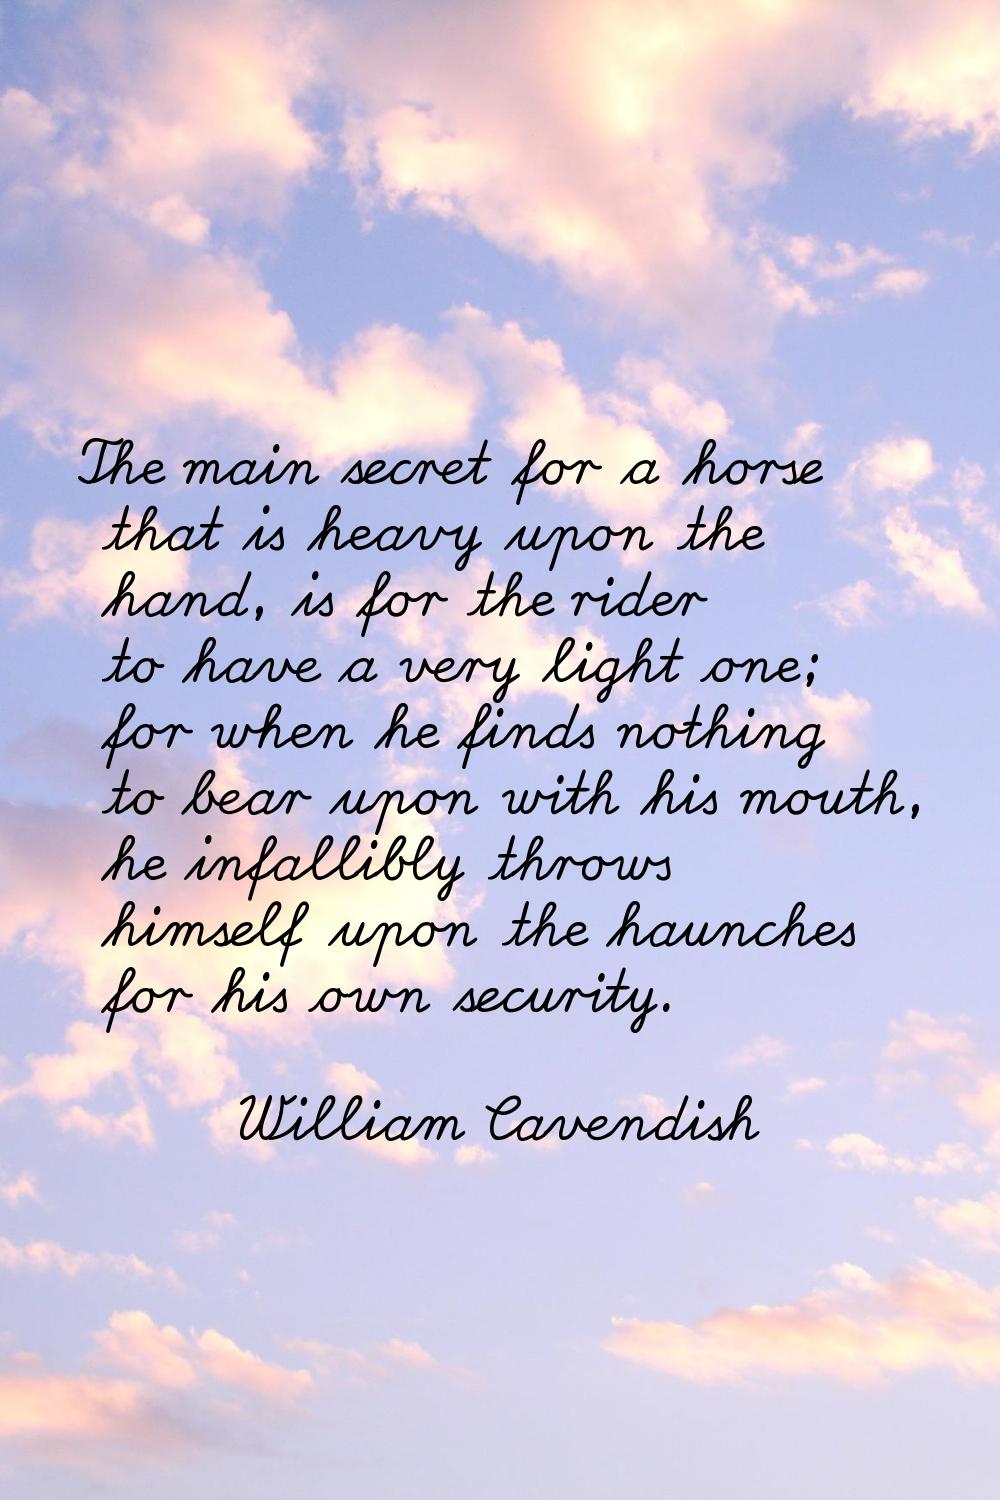 The main secret for a horse that is heavy upon the hand, is for the rider to have a very light one;